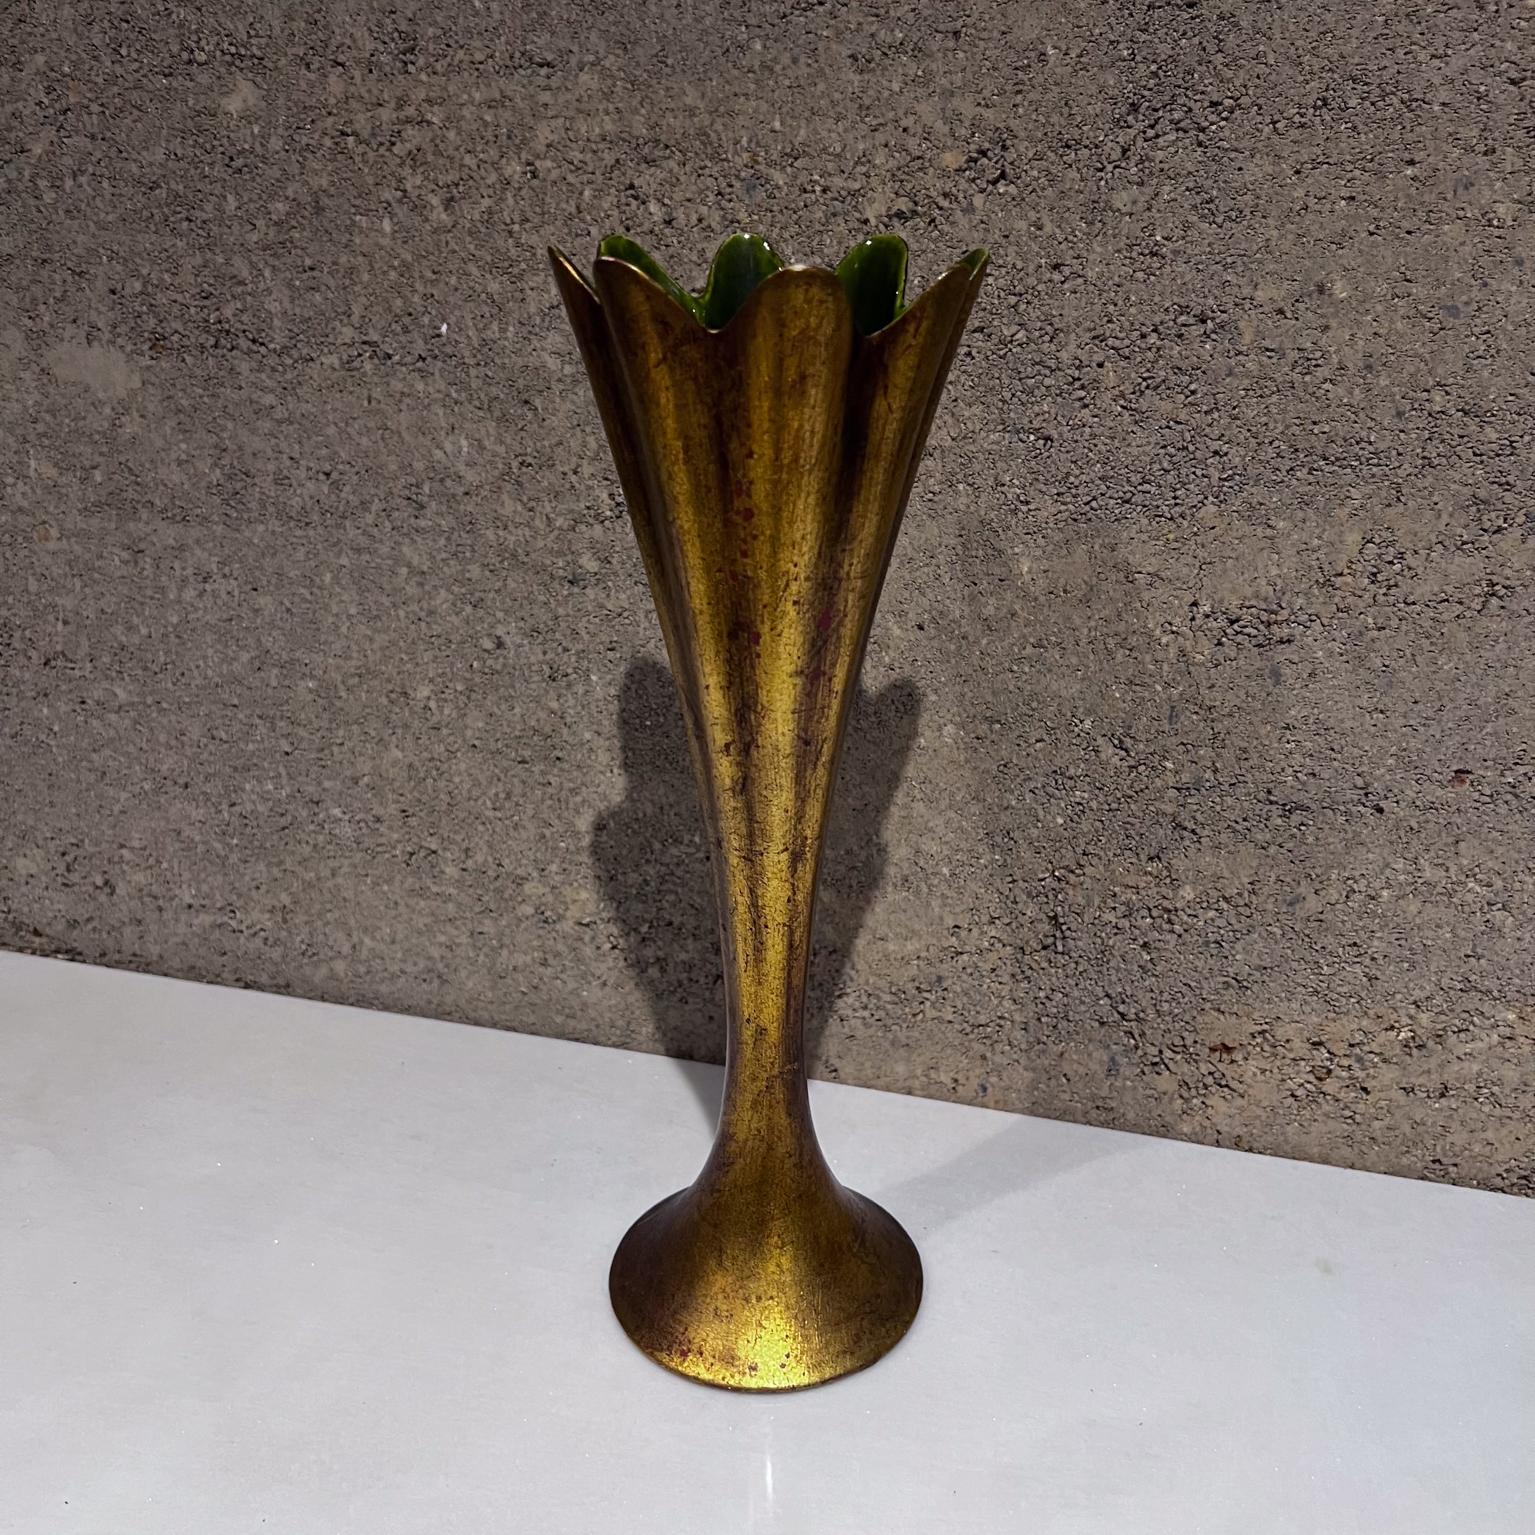 1960s Anthony Gold Leaf Vase Freeman McFarlin Pottery El Monte, California In Good Condition For Sale In Chula Vista, CA